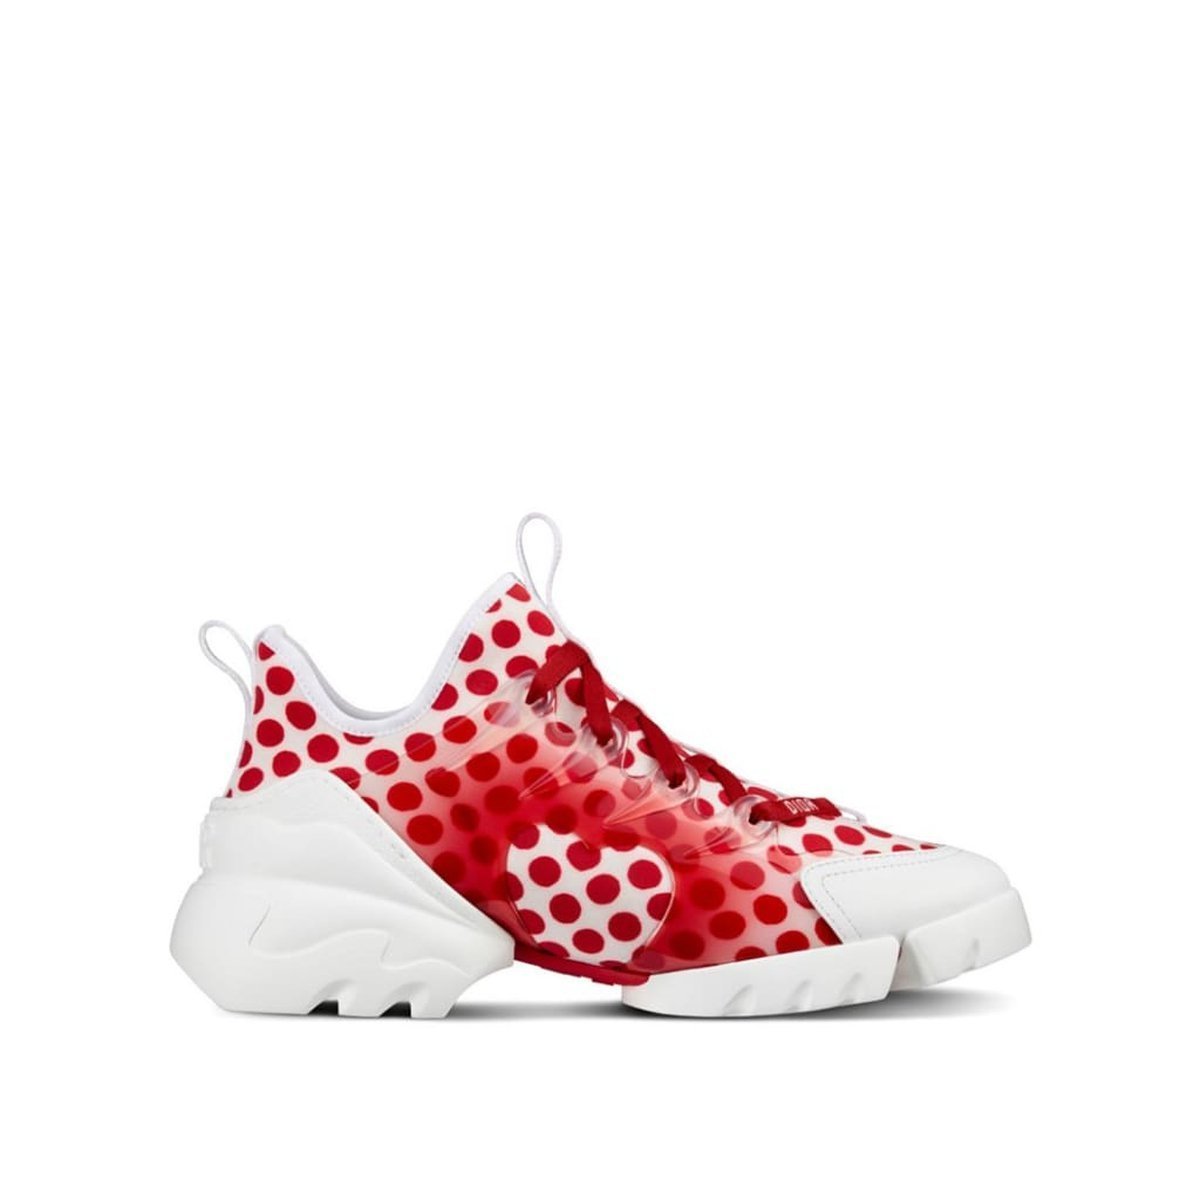 Dior-D-Connect Neoprene Sneaker In Dioramour Dots Print - Runway Catalog